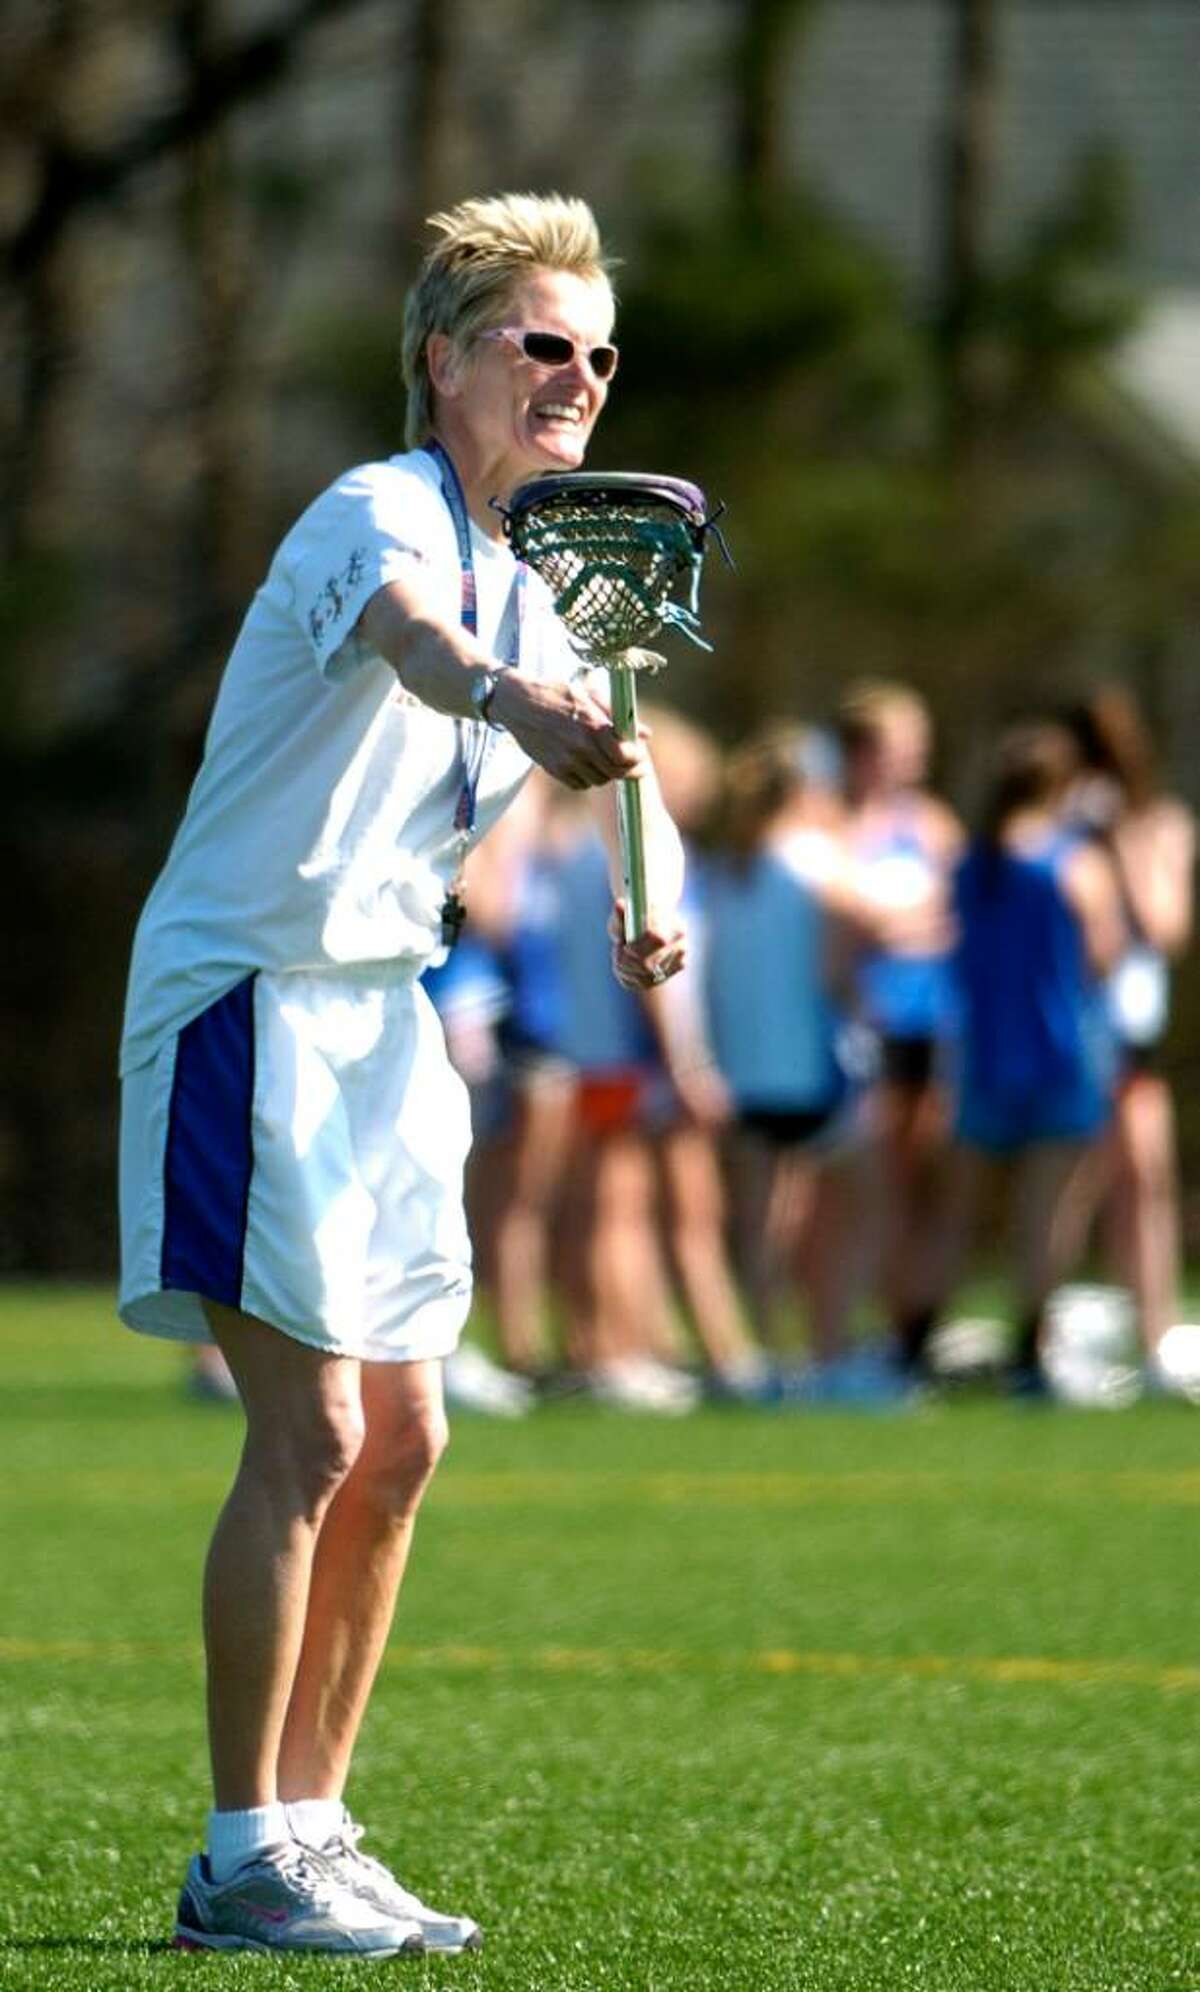 Coach Lisa Lindley works with team during girls lacrosse practice at Darien High School in Darien, Conn. on Monday April 5, 2010.